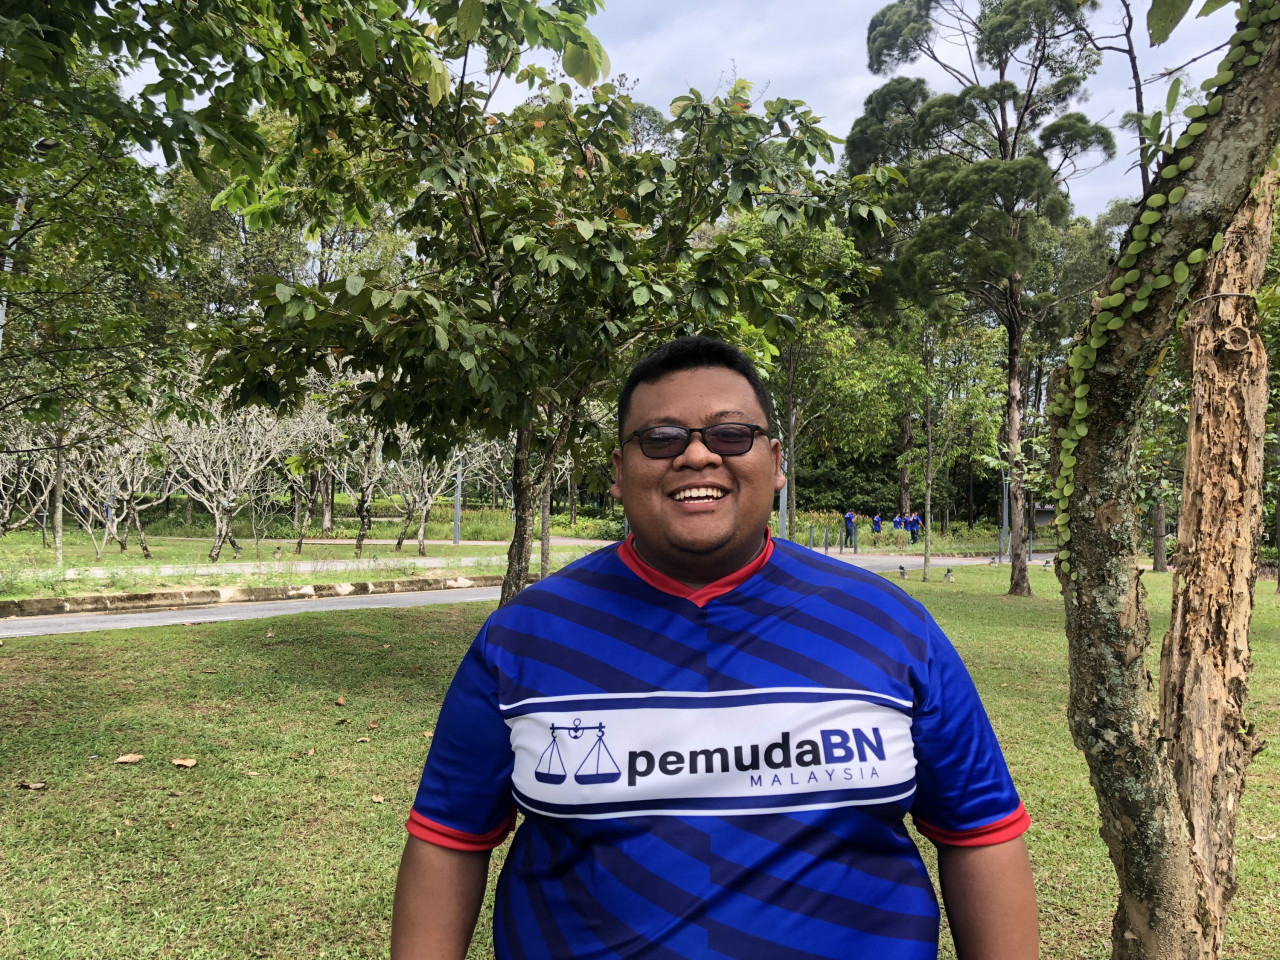 Putera Umno secretary Muhammad Irfaan Fikri says Barisan Nasional members will unanimously accept any decision made on the coalition’s prime minister candidate for the looming 15th general election. – HAKIM MAHARI/The Vibes pic, September 18, 2022